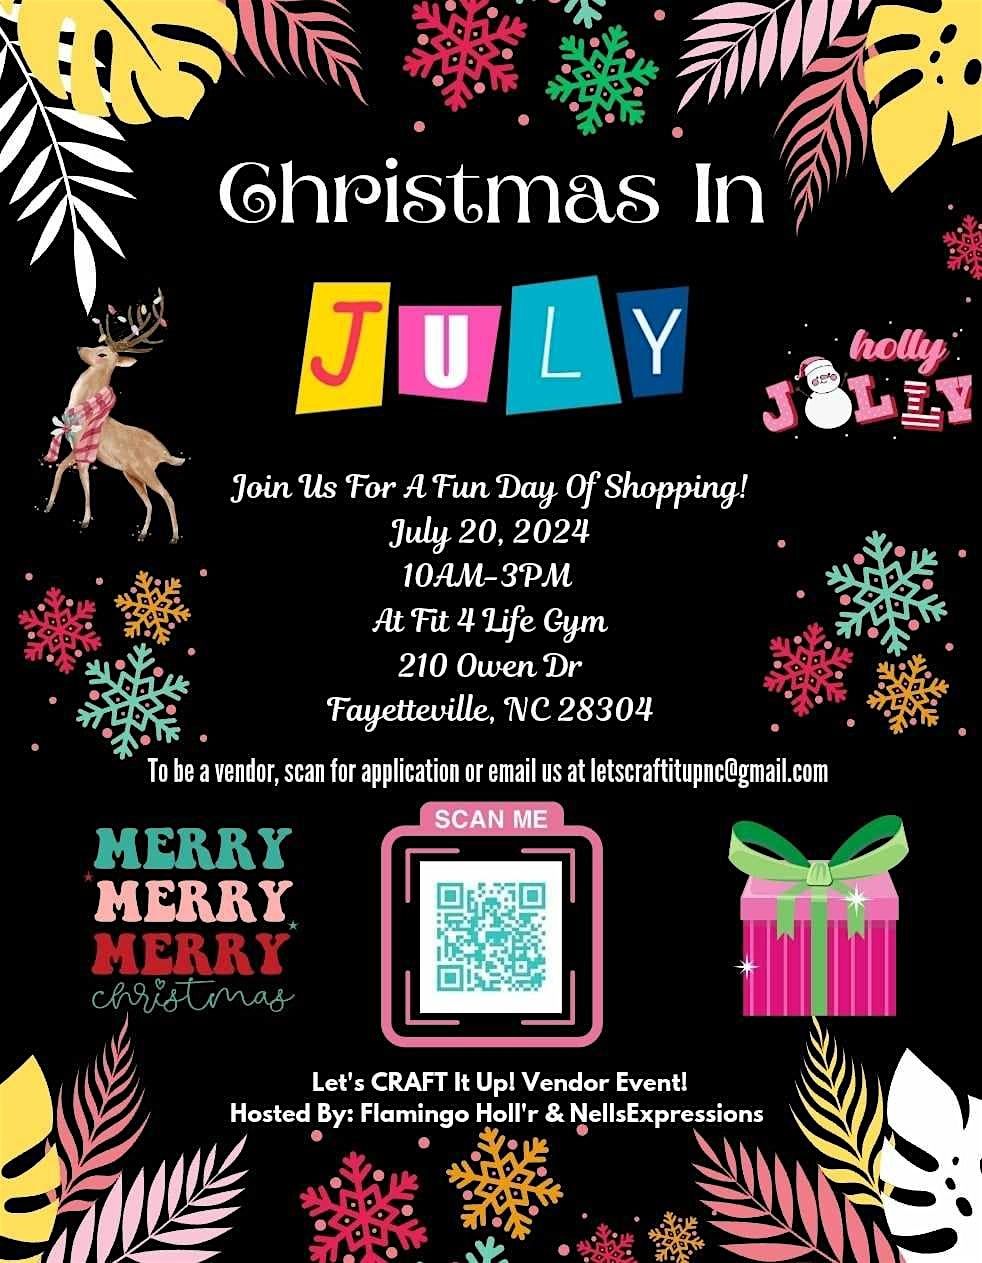 Let's CRAFT It Up: Christmas in July